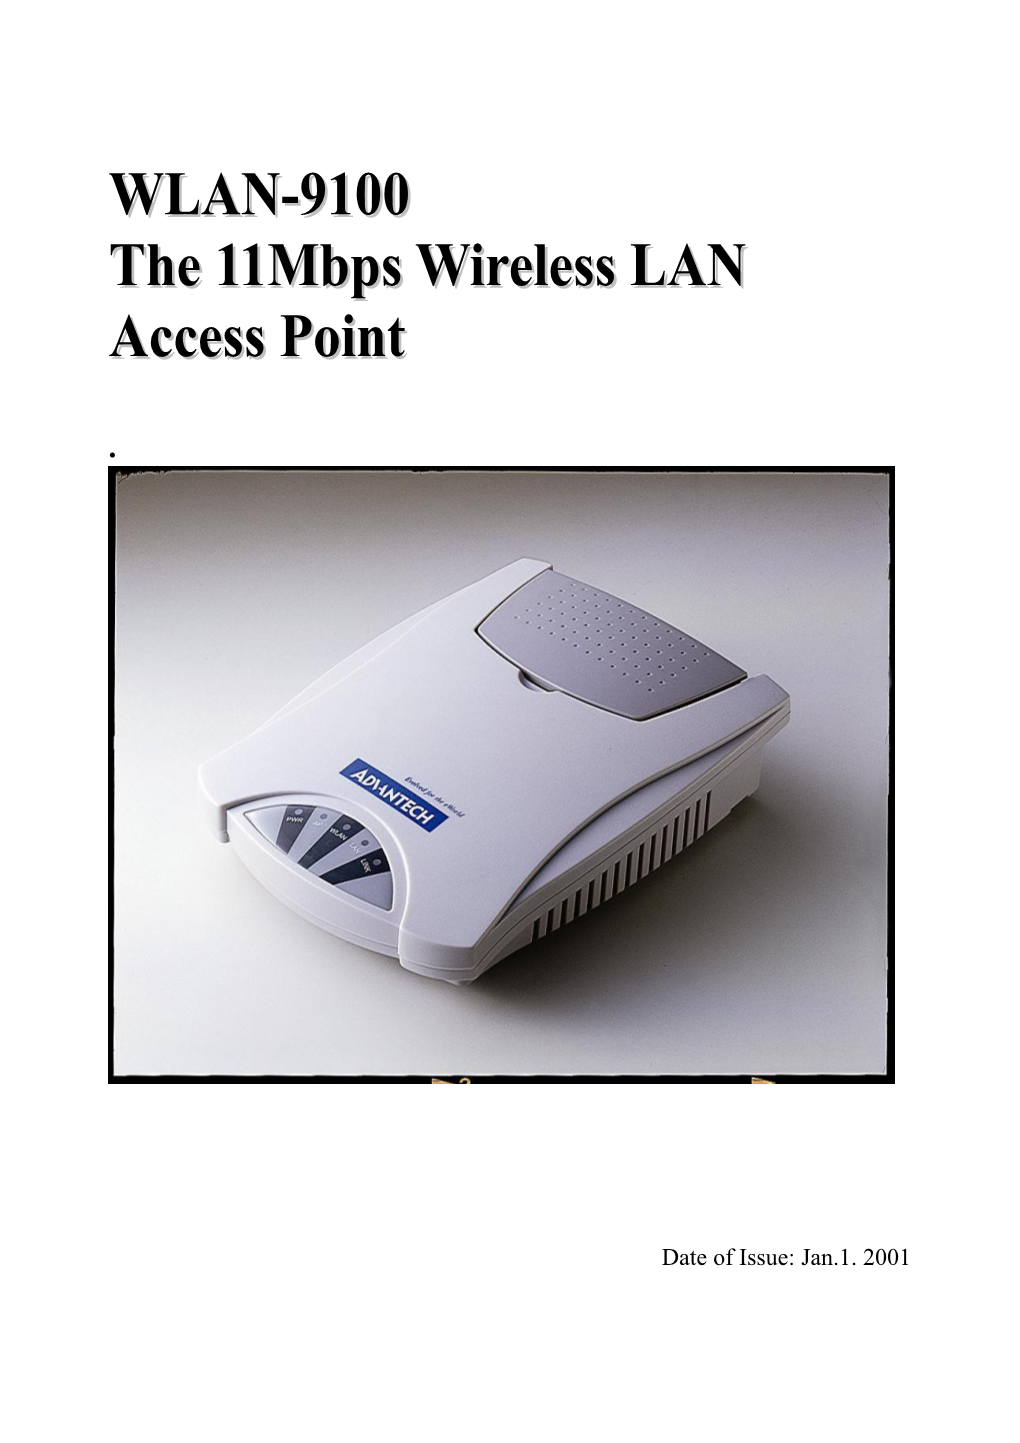 The 11Mbps Wireless LAN Access Point